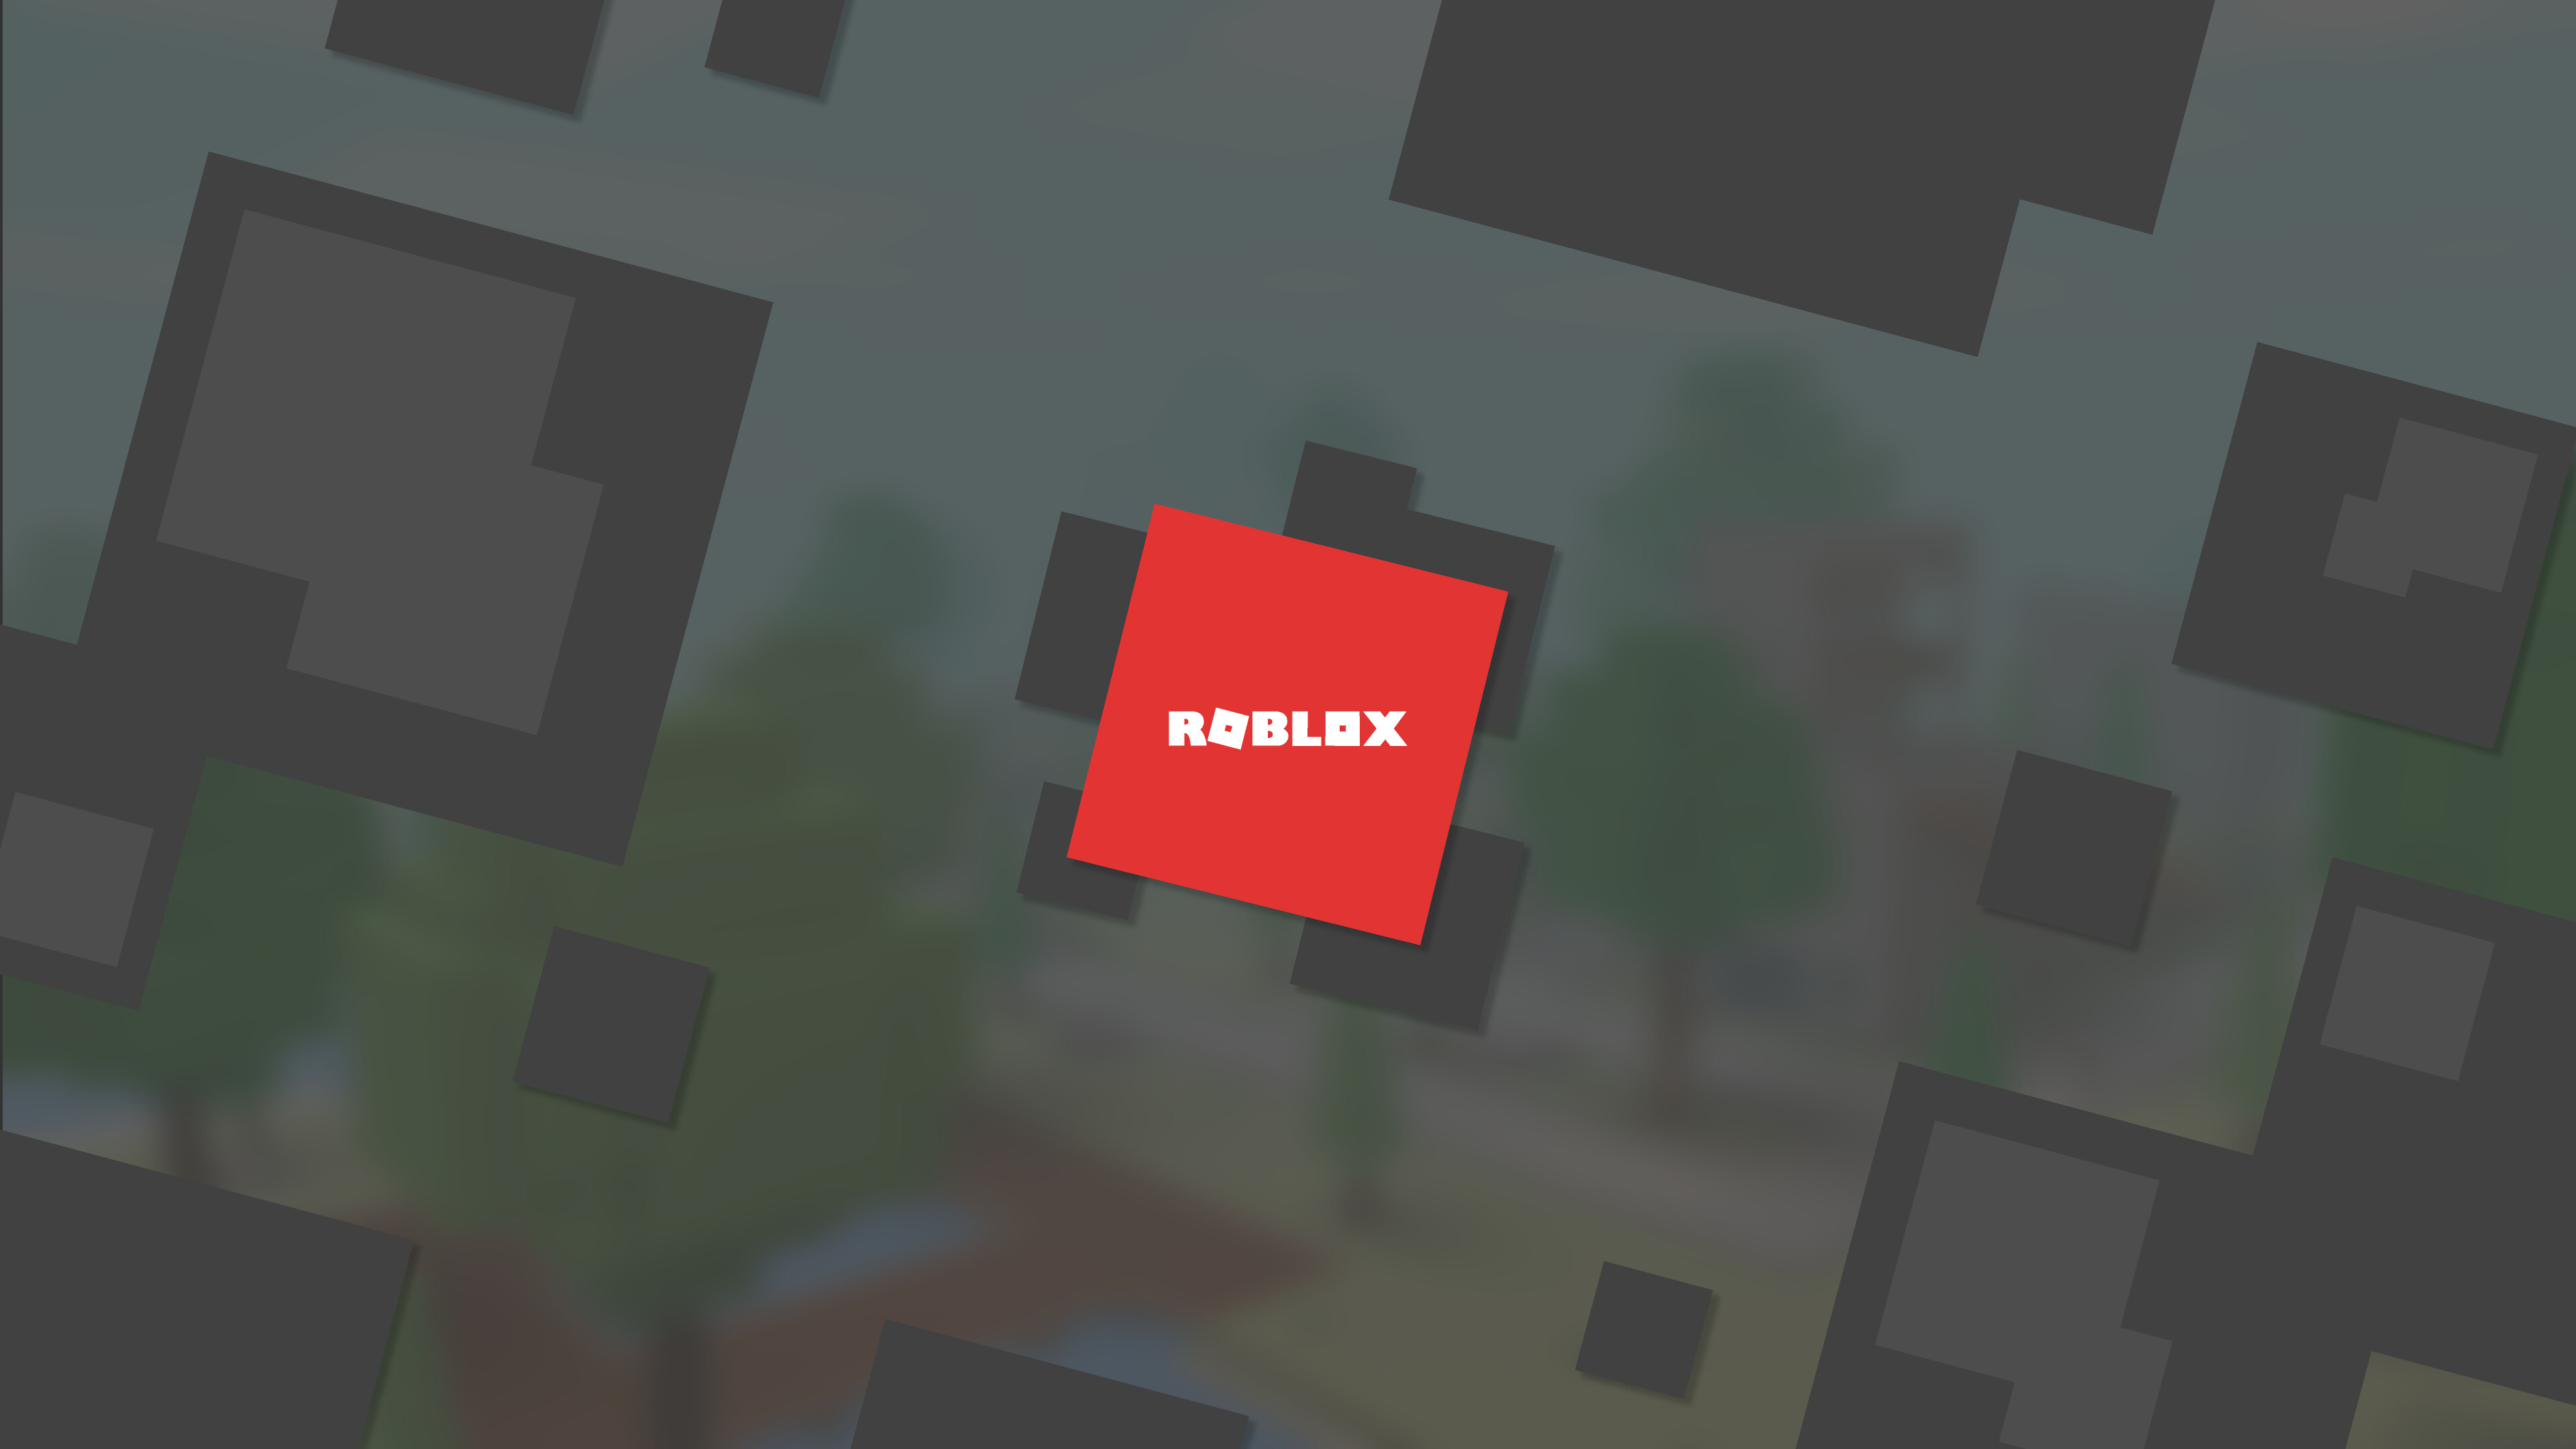 Roblox: Allows users to program games and play games created by other users. 3840x2160 4K Wallpaper.